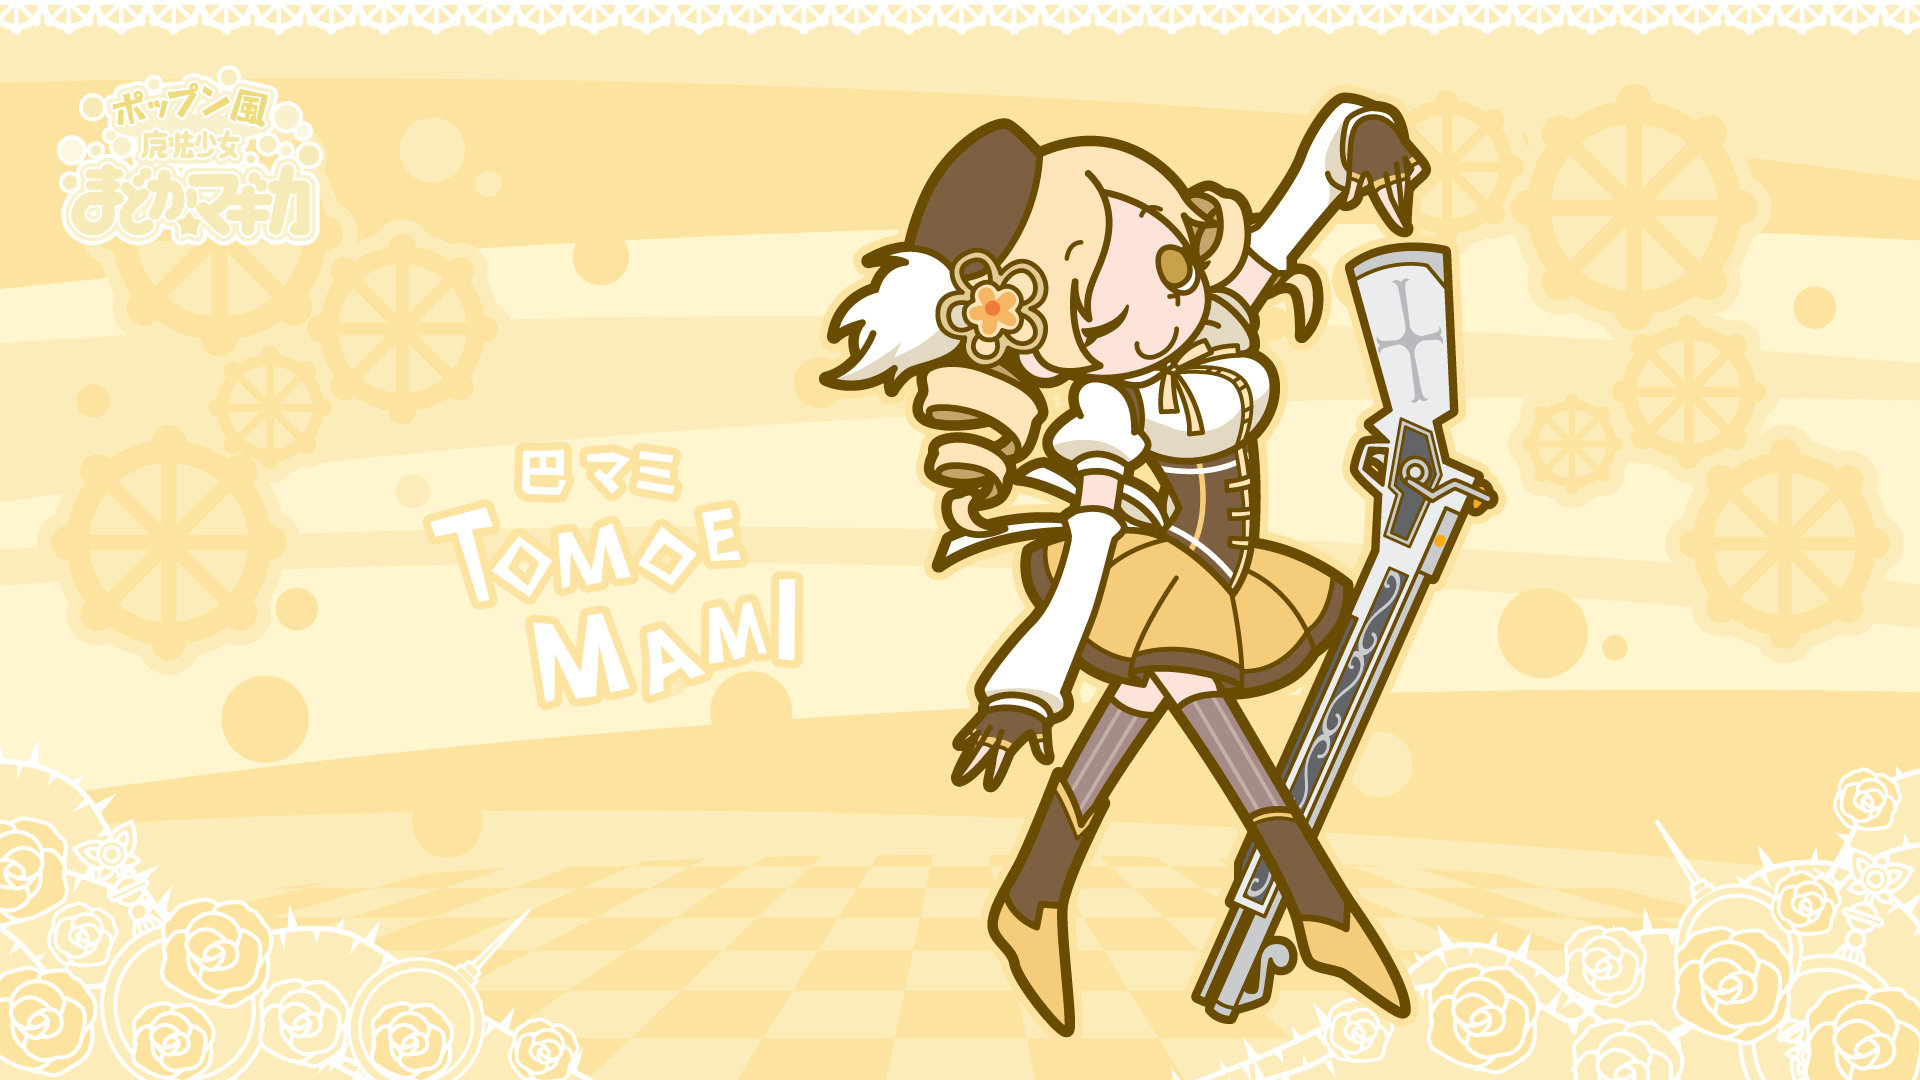 Download 1080p Mami Tomoe desktop background ID:31840 for free